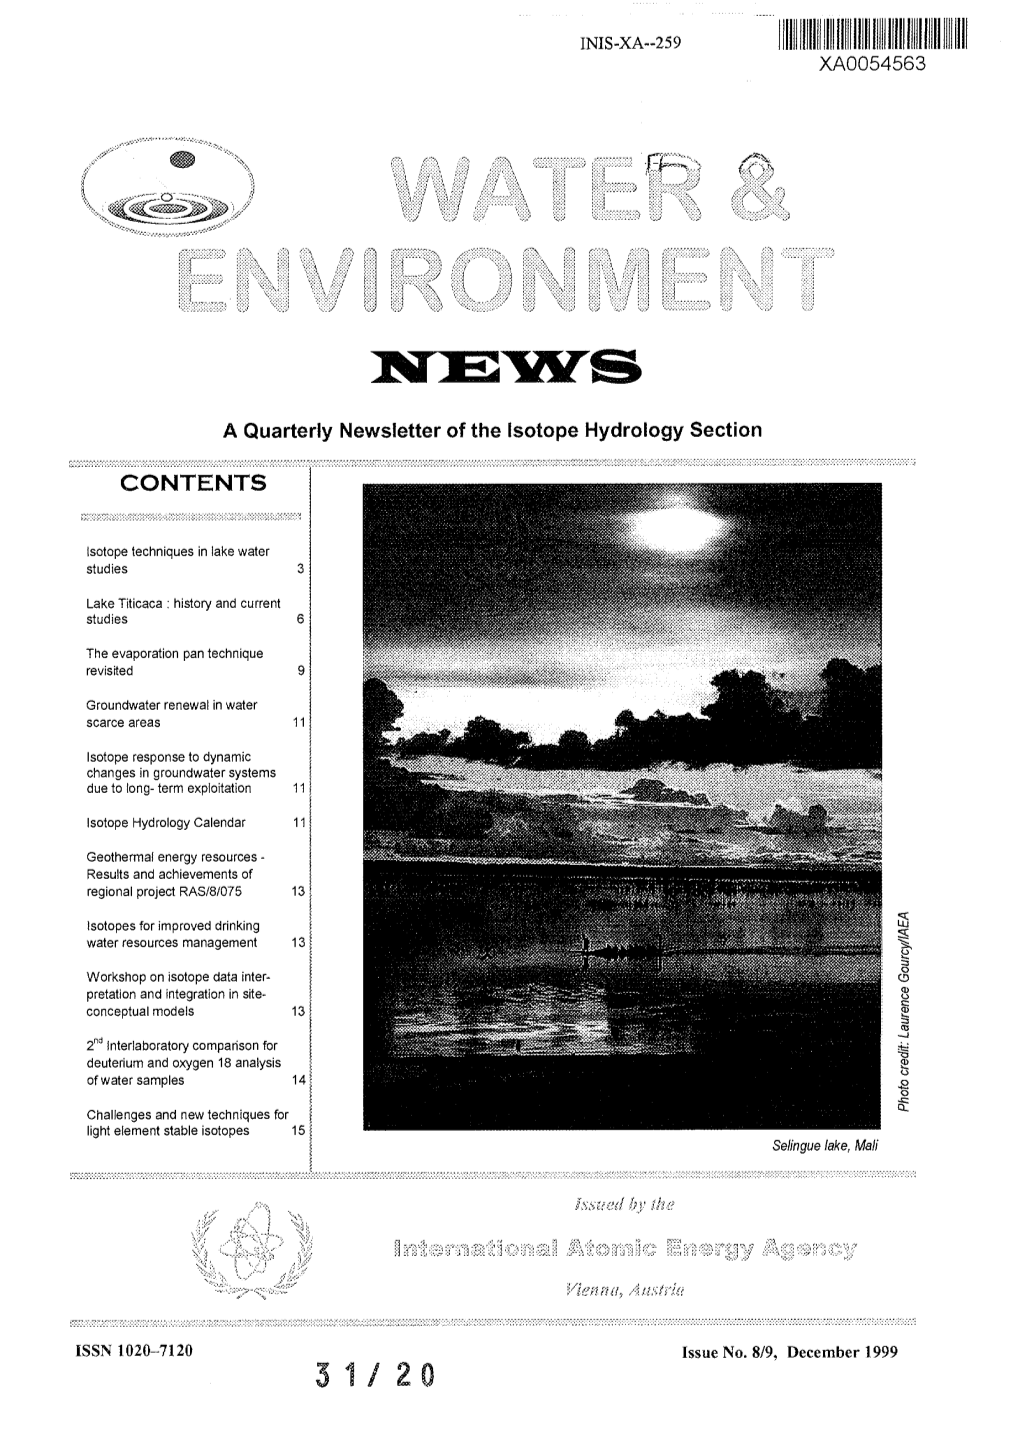 A Quarterly Newsletter of the Isotope Hydrology Section